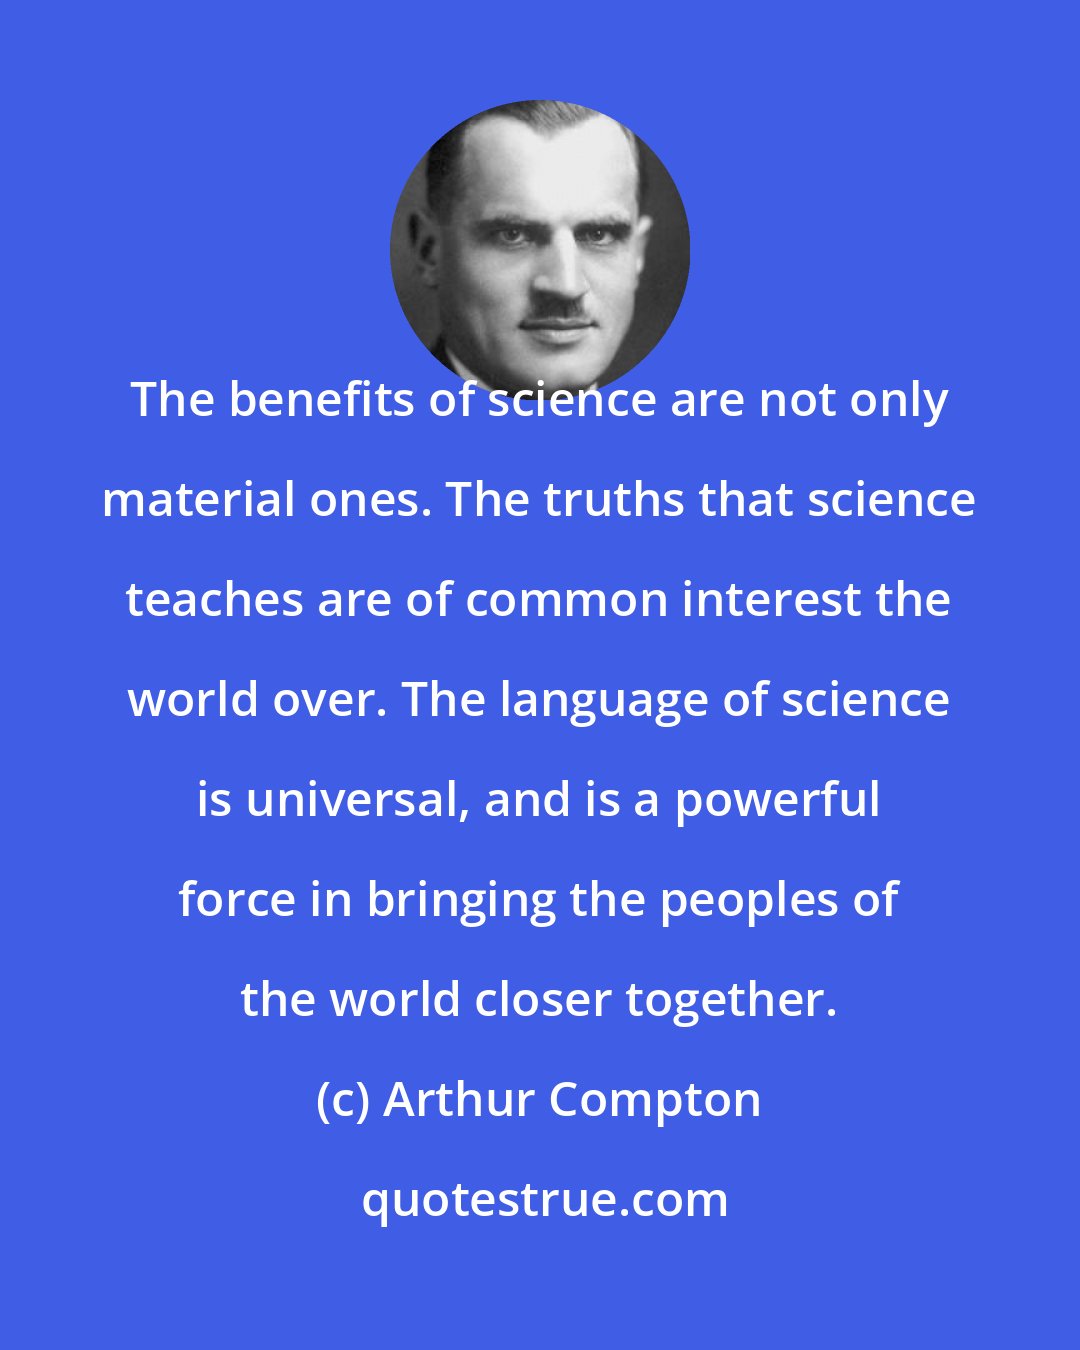 Arthur Compton: The benefits of science are not only material ones. The truths that science teaches are of common interest the world over. The language of science is universal, and is a powerful force in bringing the peoples of the world closer together.